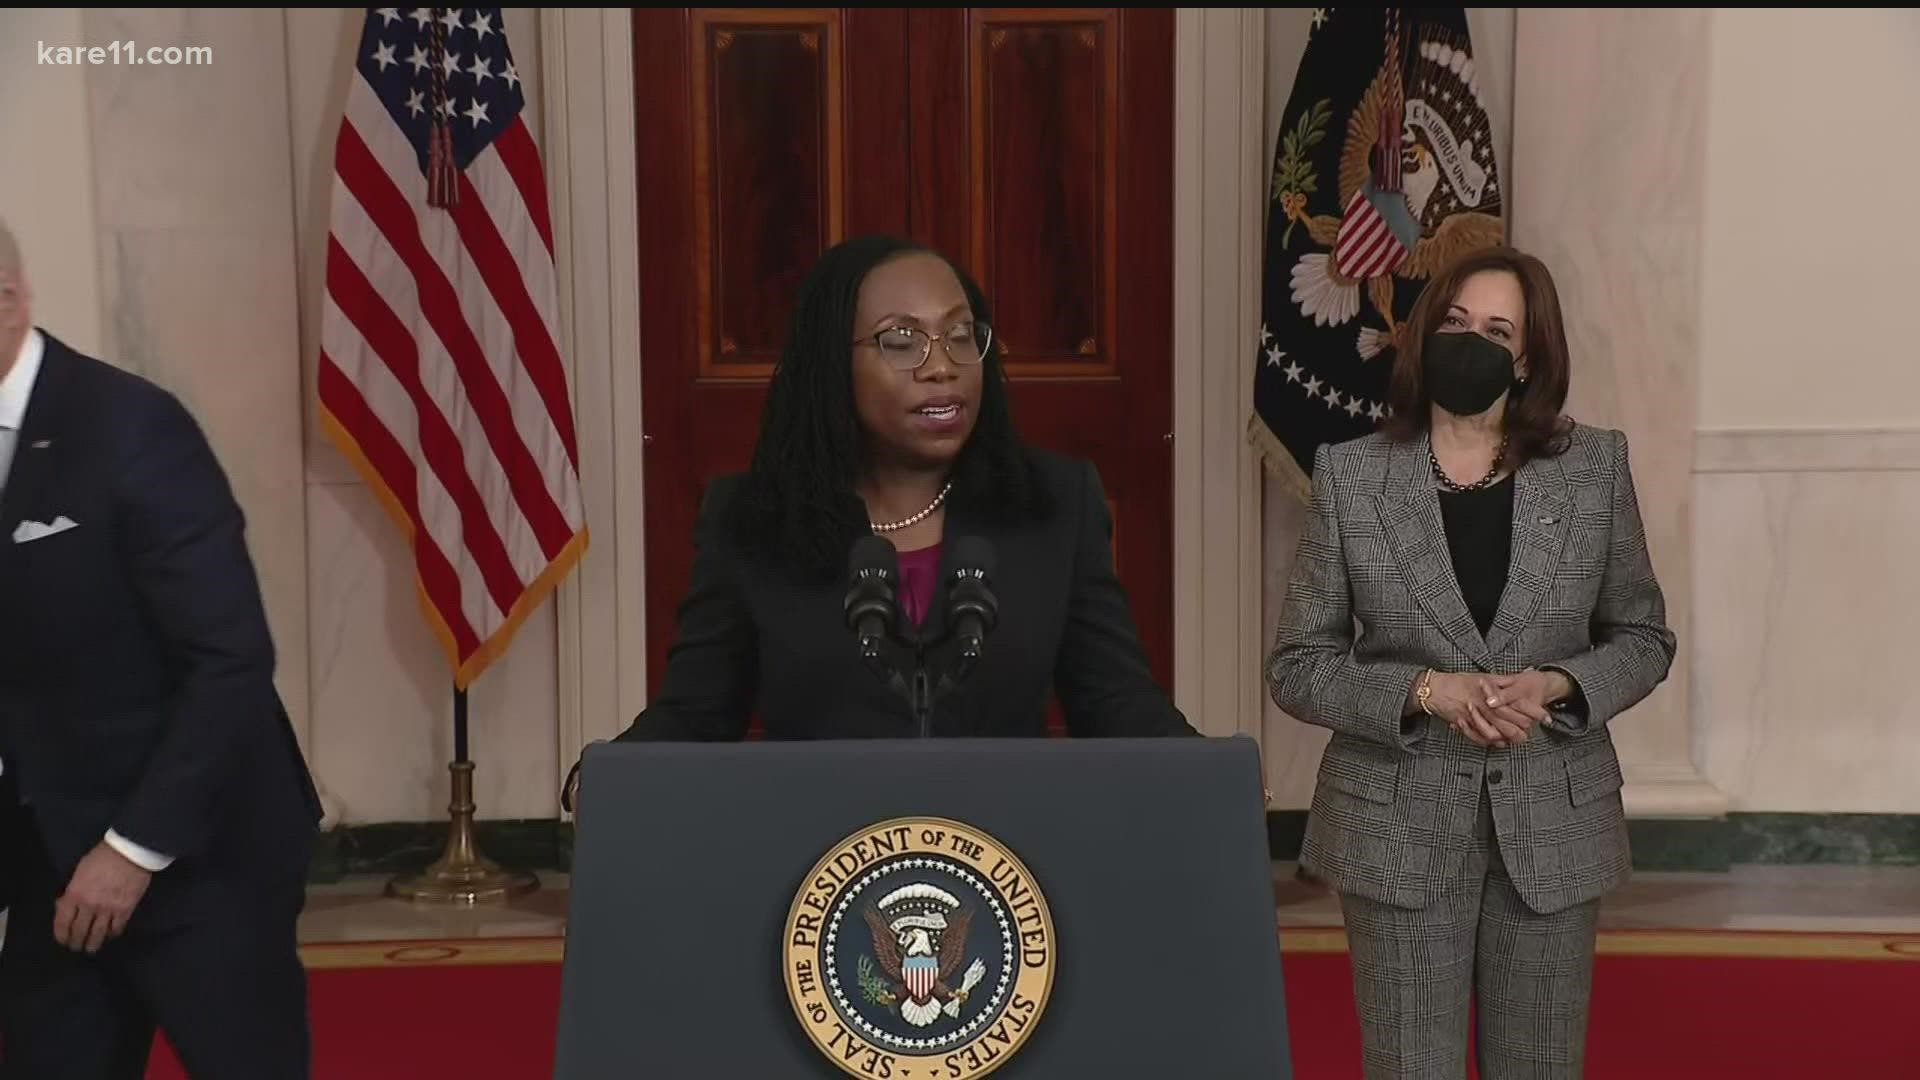 On Friday, President Joe Biden named Judge Ketanji Brown Jackson his nominee to the Supreme Court. If appointed, she would become the first Black woman in SCOTUS.